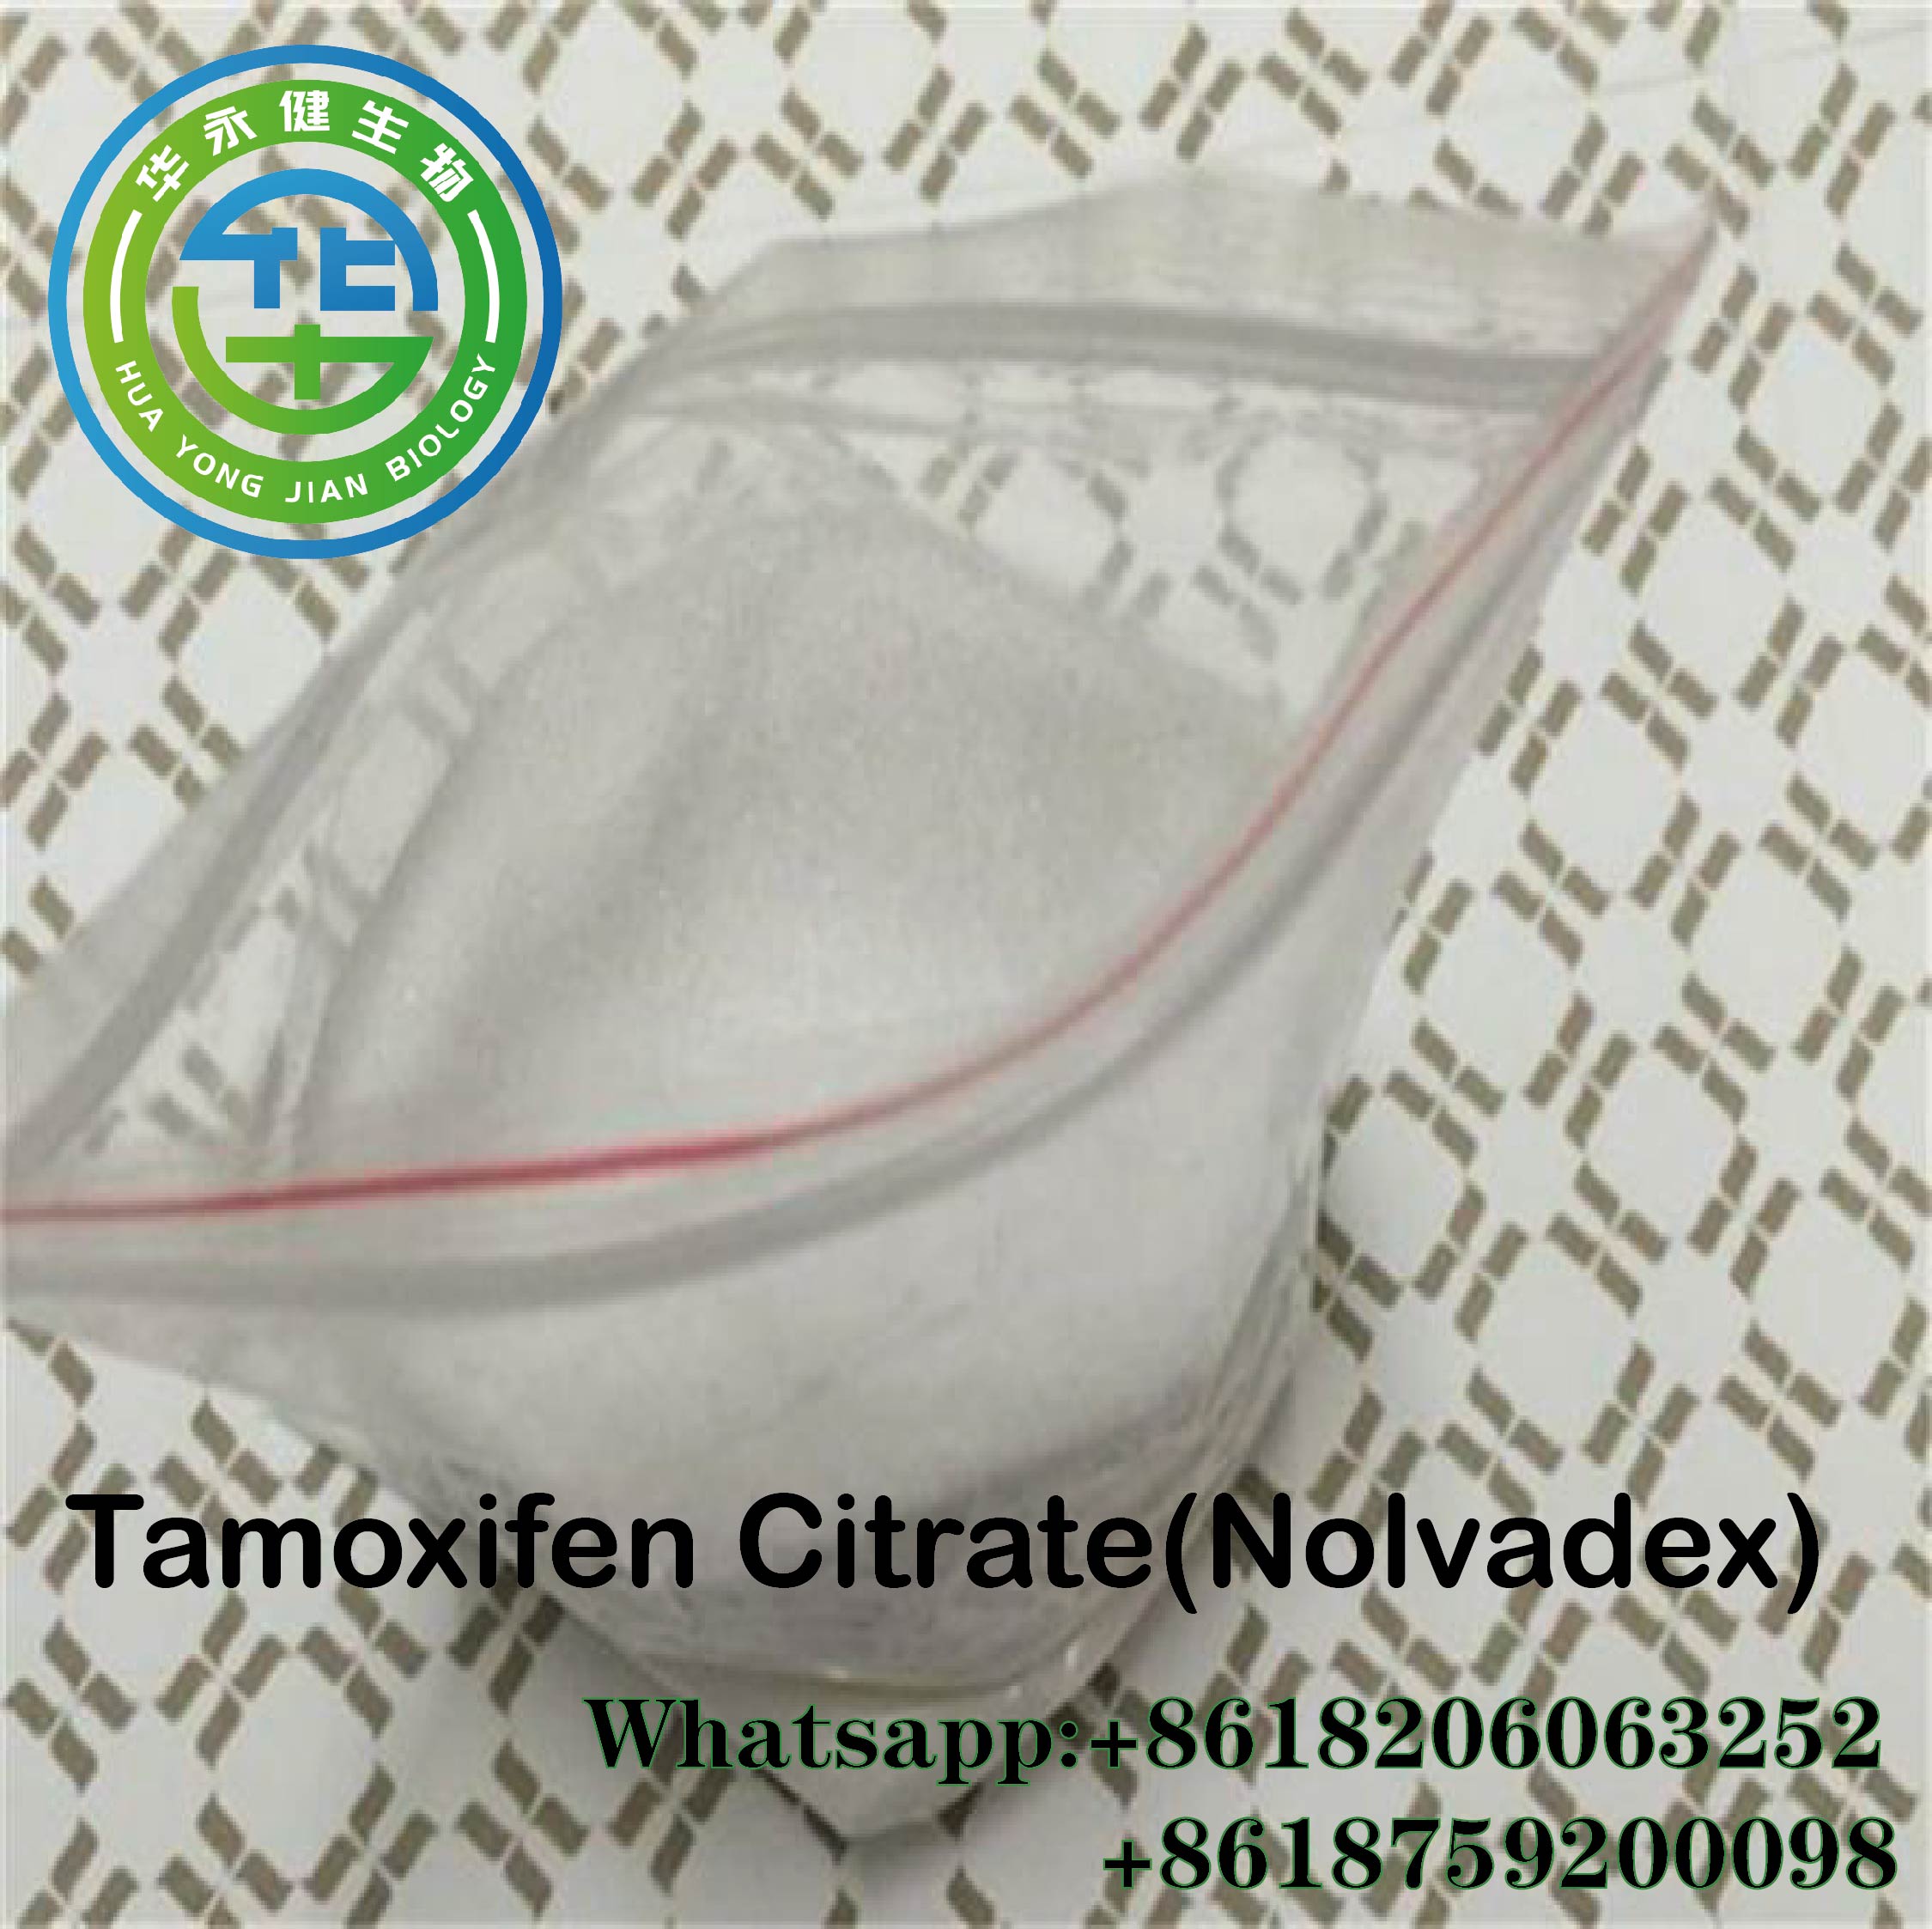 Nolvadex Raw Chemical Steroids Tamoxifen Citrate Powder for Muscle Human Growth CasNO.54965-24-1